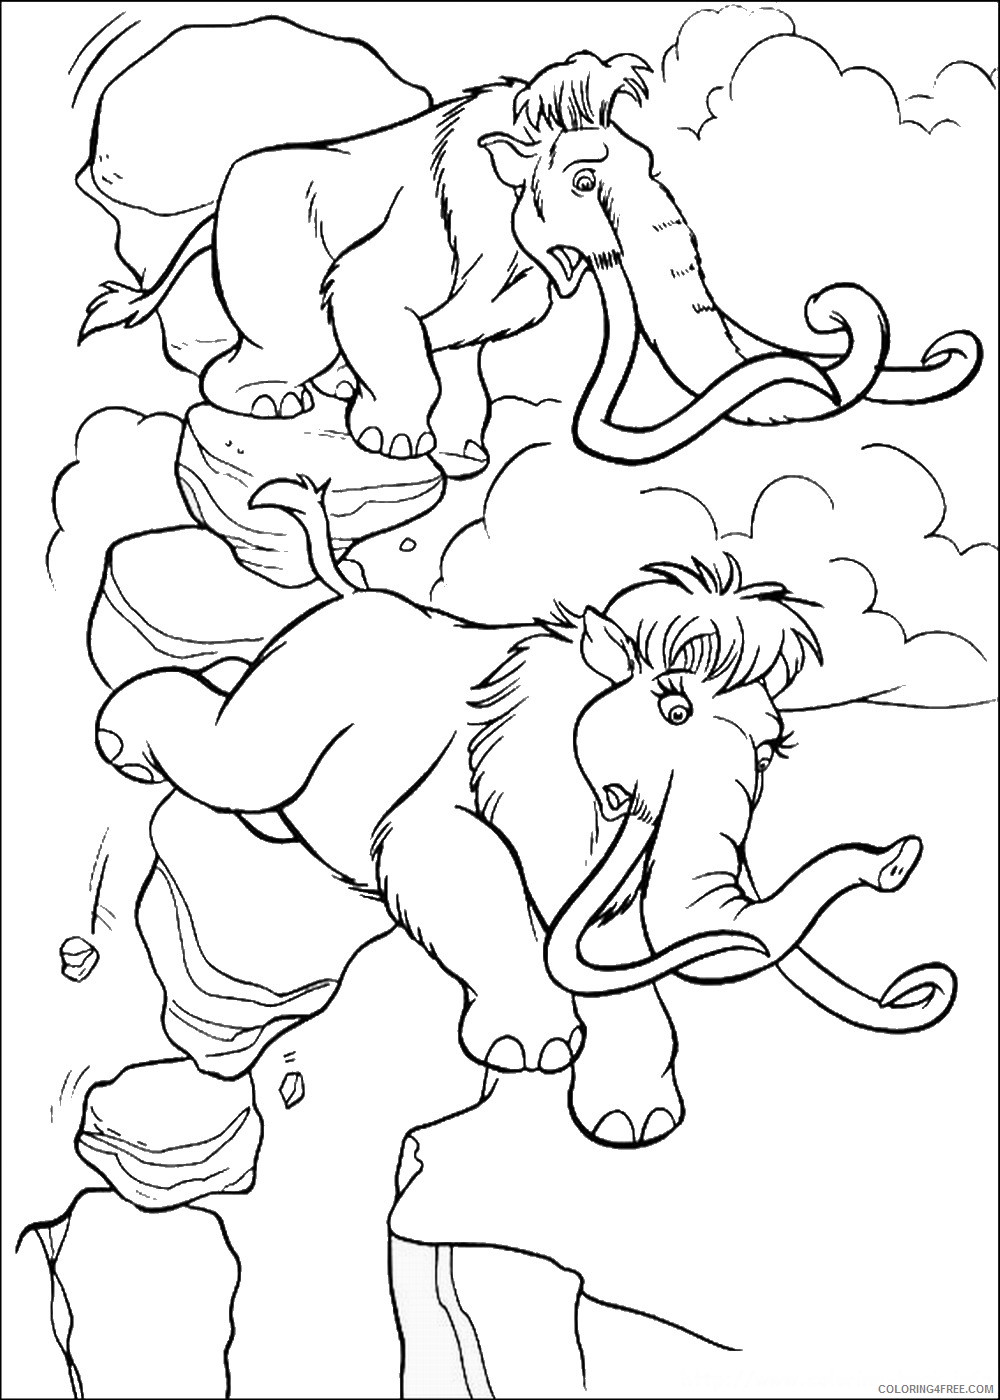 Ice Age Coloring Pages Cartoons ice age 09 Printable 2020 3380 Coloring4free